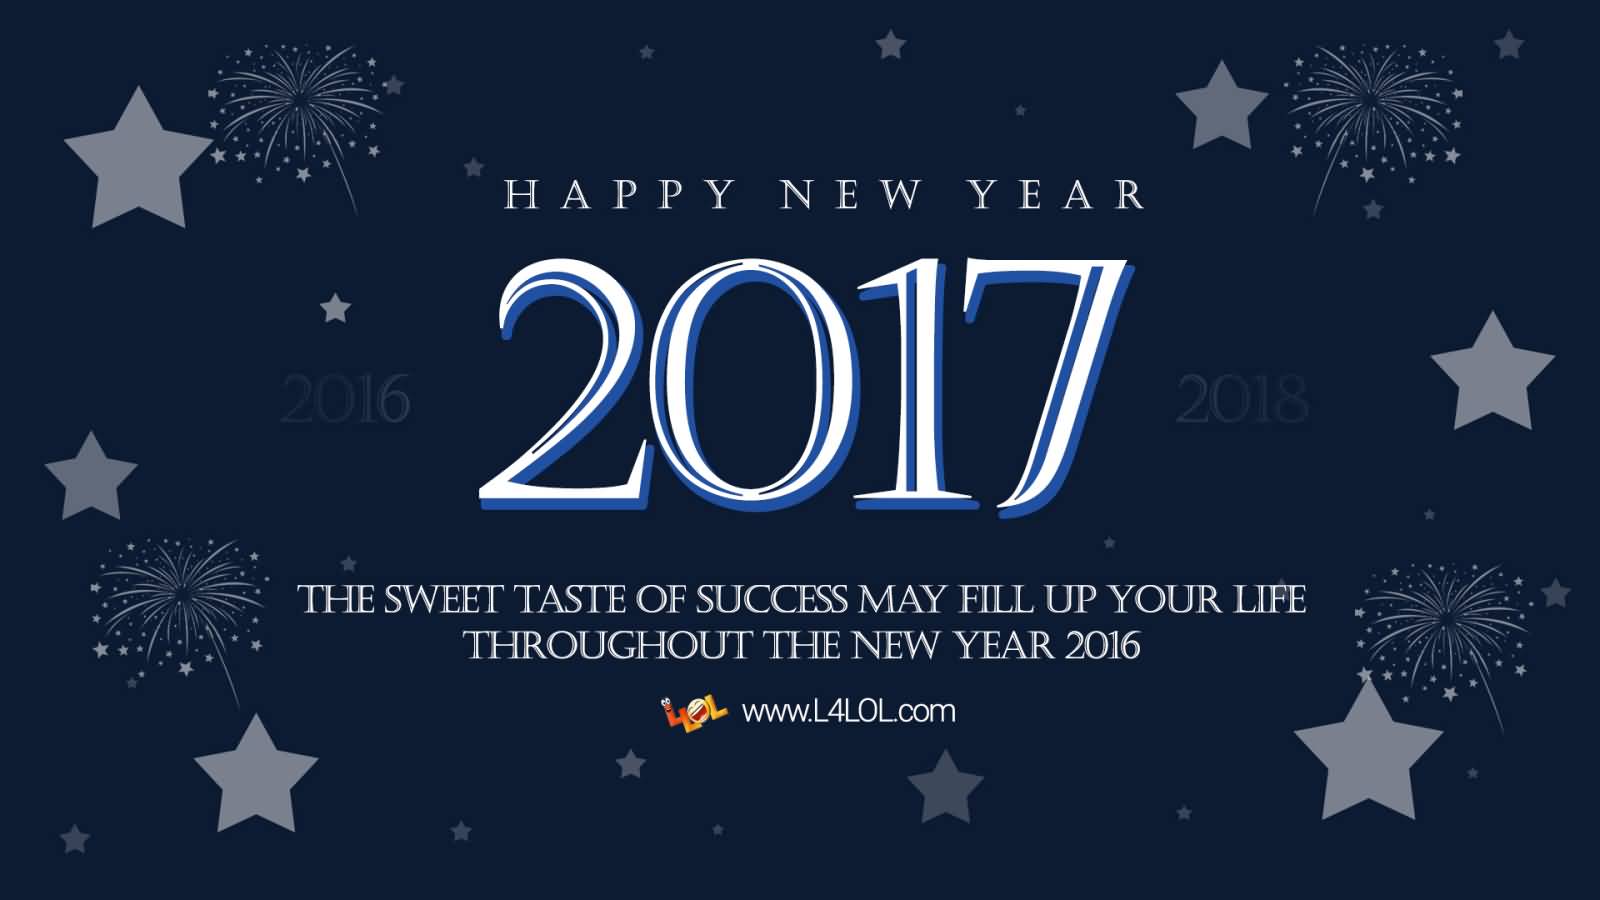 Happy New Year 2017 The Sweet Taste Of Success May Fill Up Your Life Throughout The New Year 2016